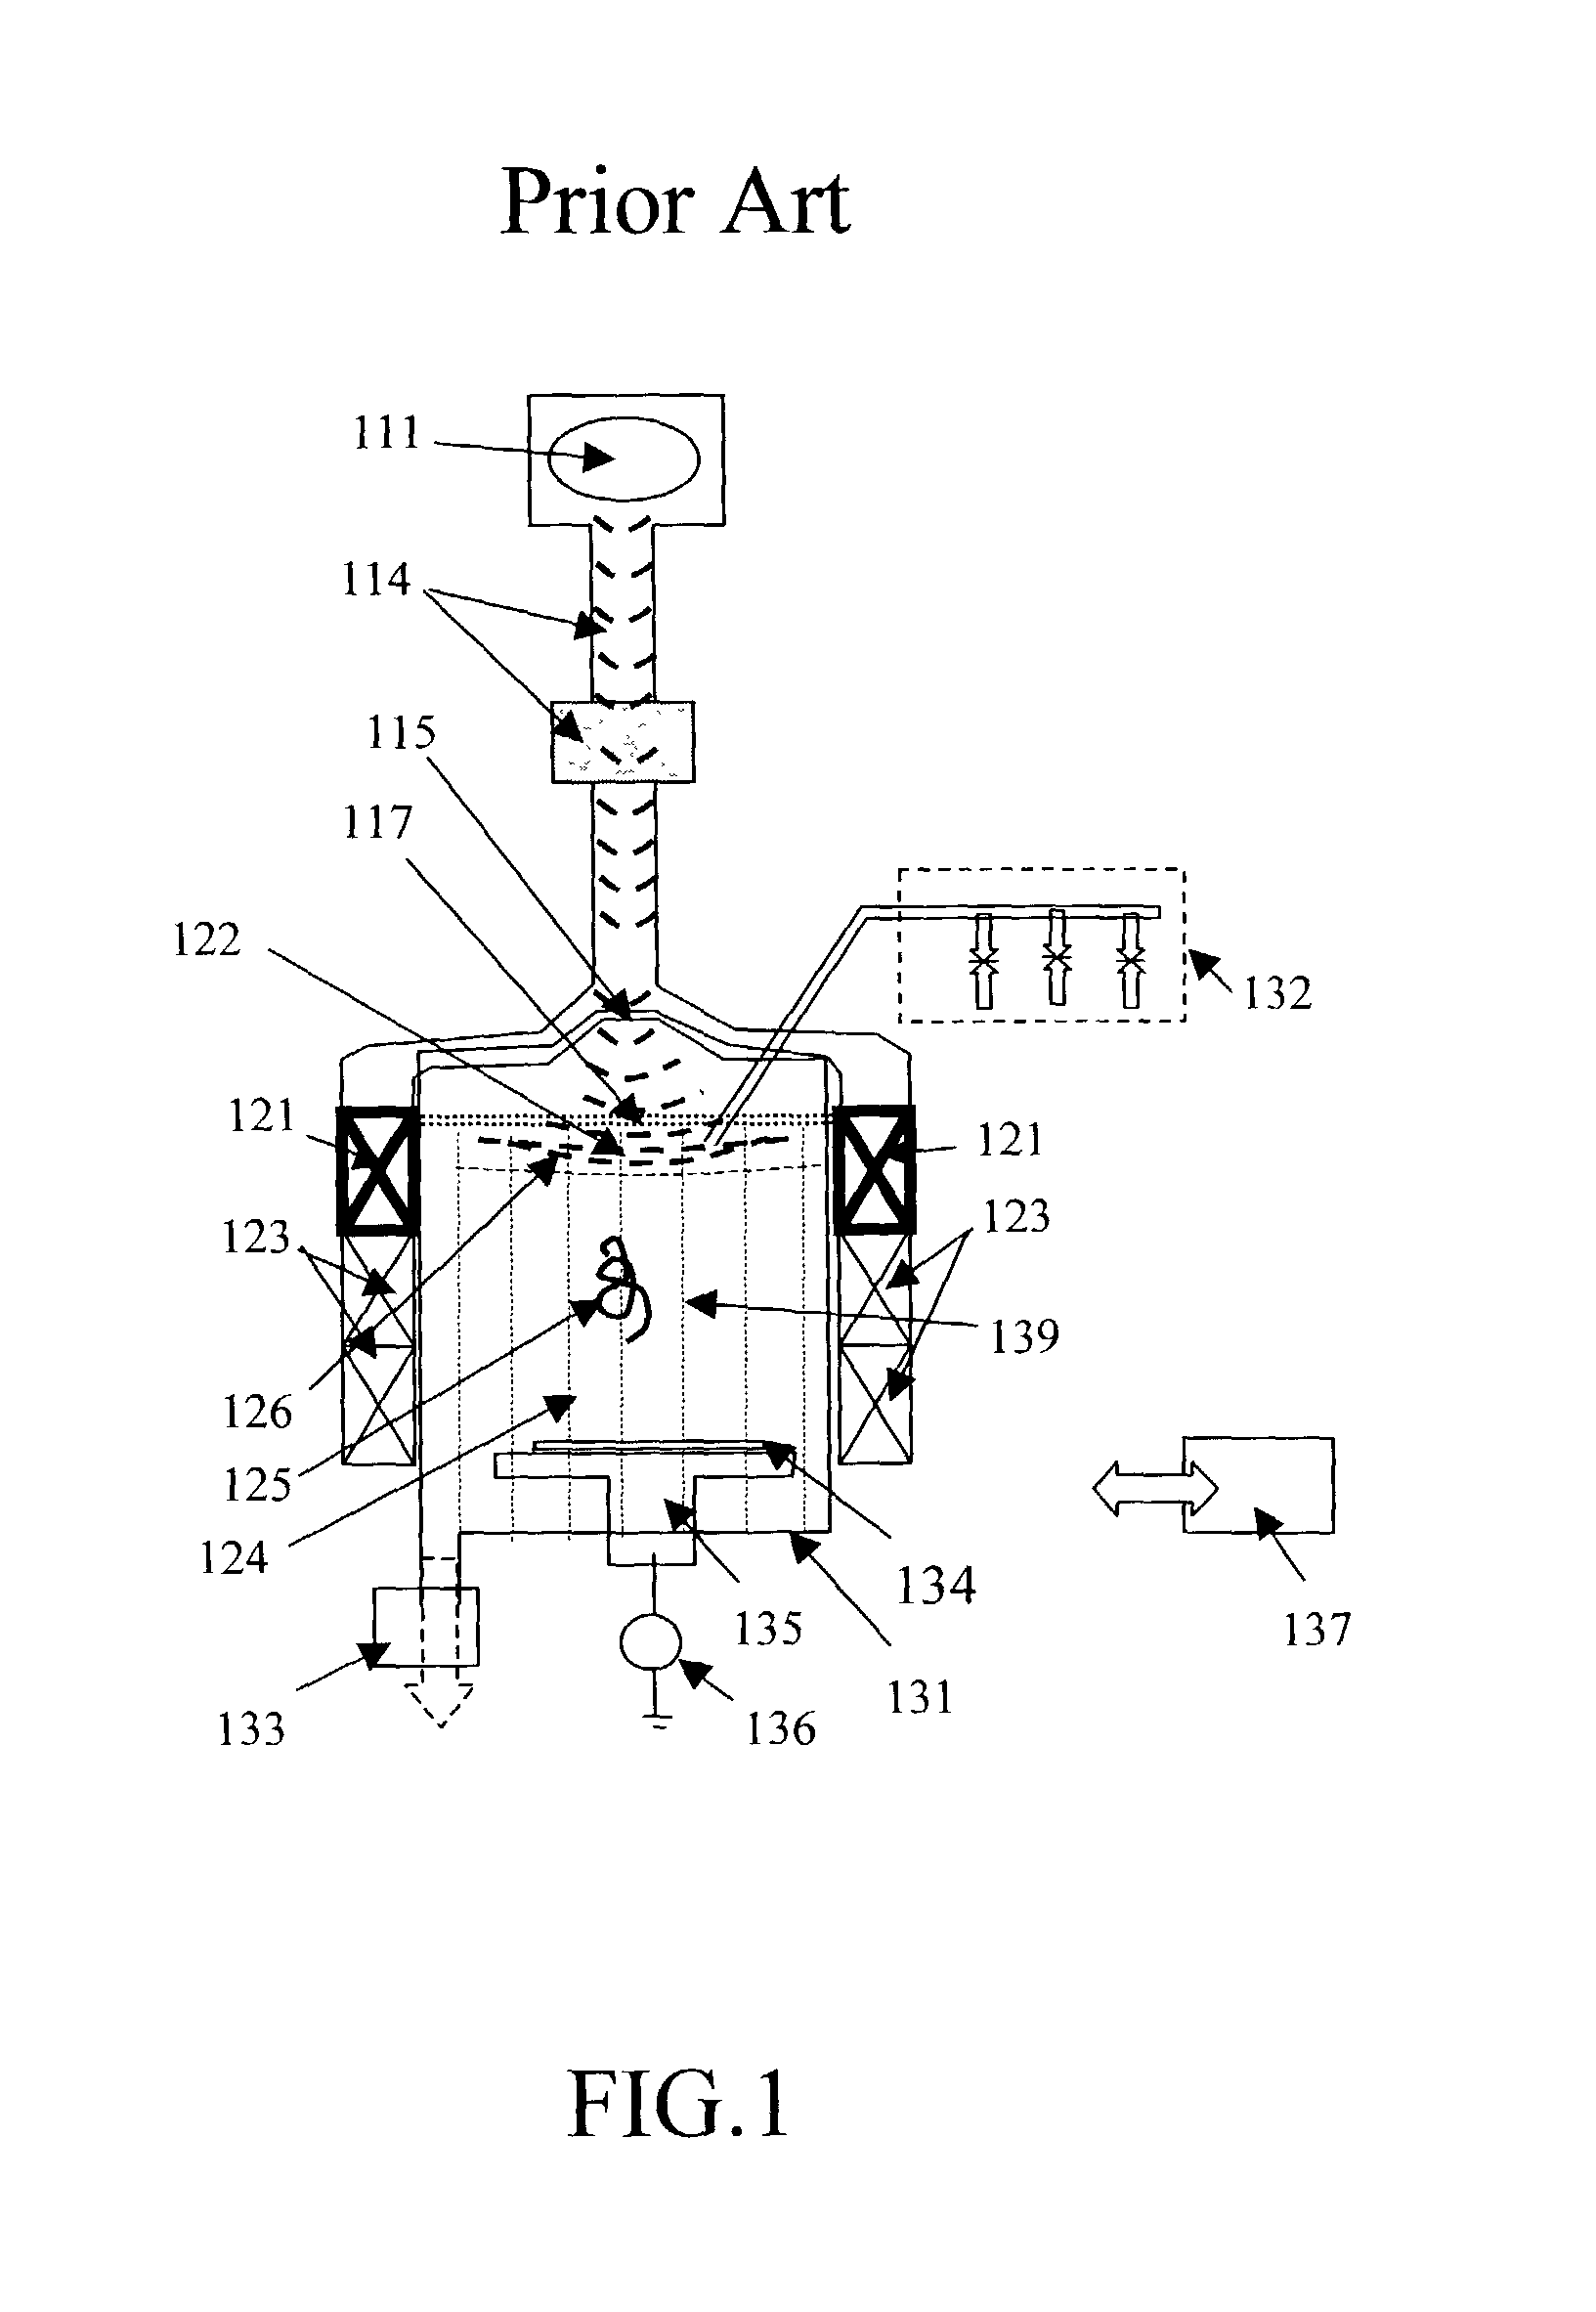 Electron-cyclotron resonance plasma reactor with multiple exciters